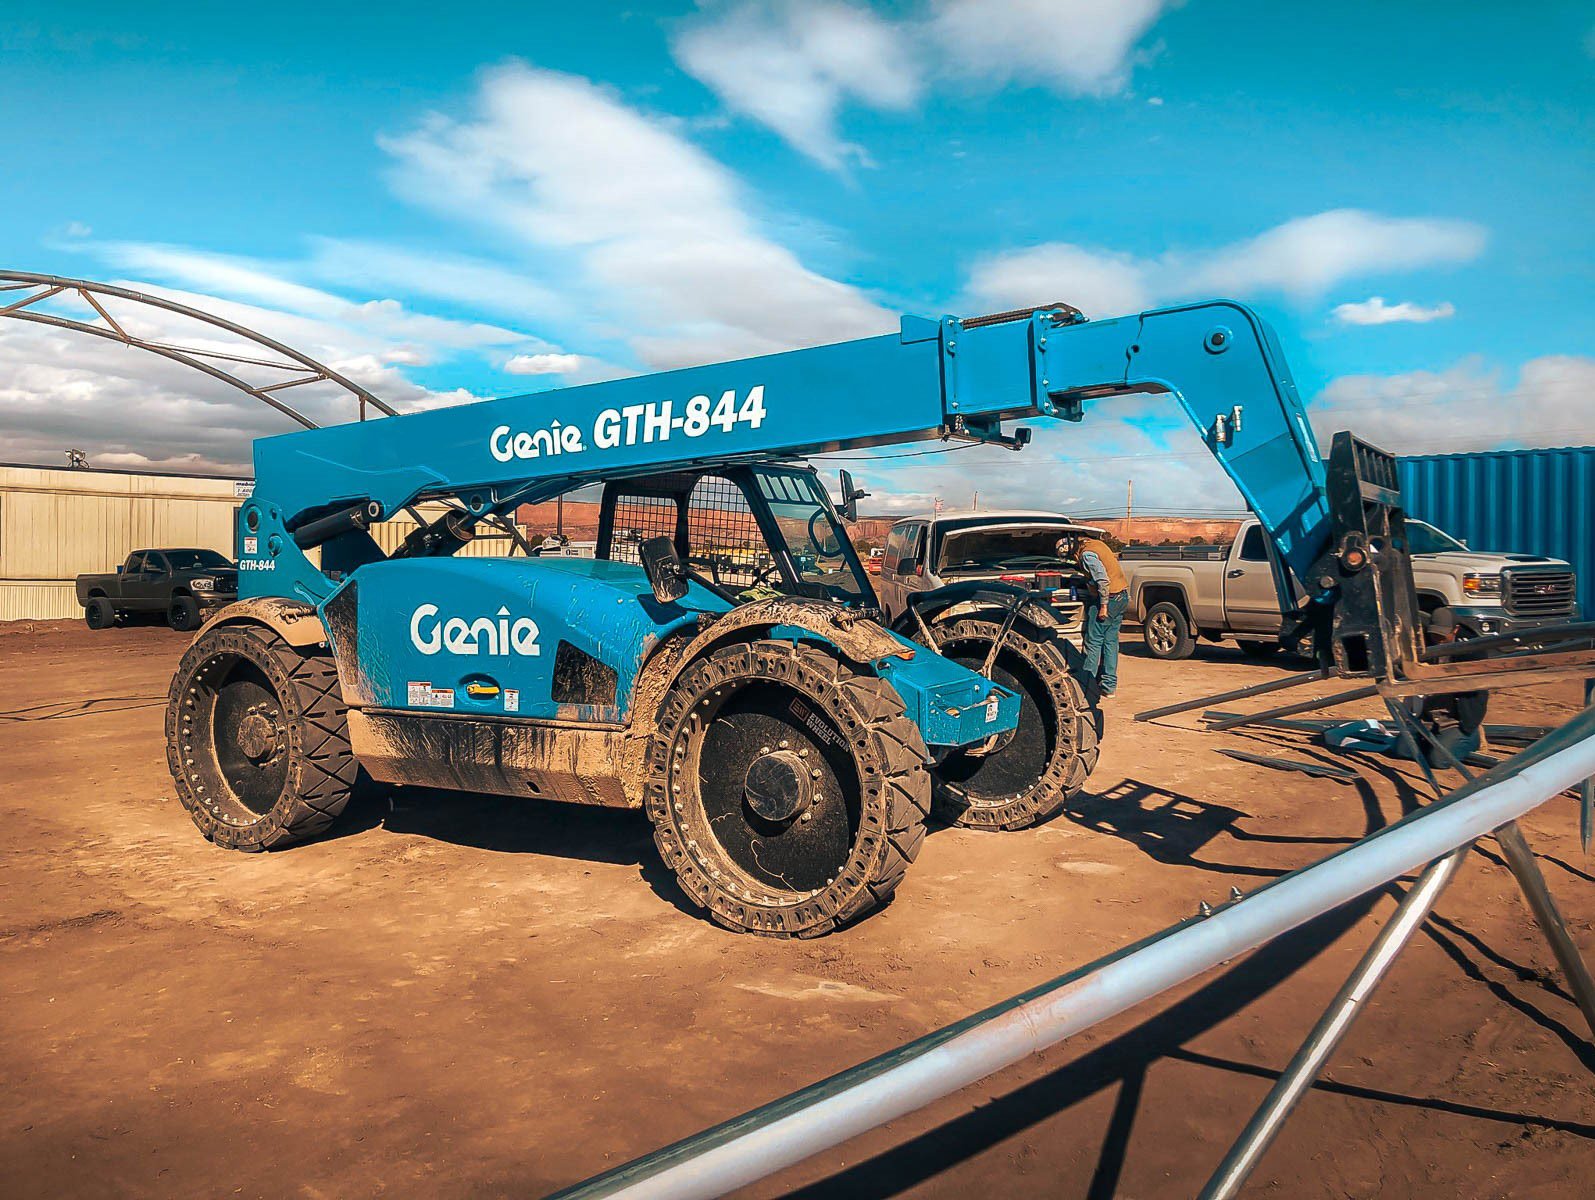 This picture shows our CAT telehandler tires on a blue Genie telehandler